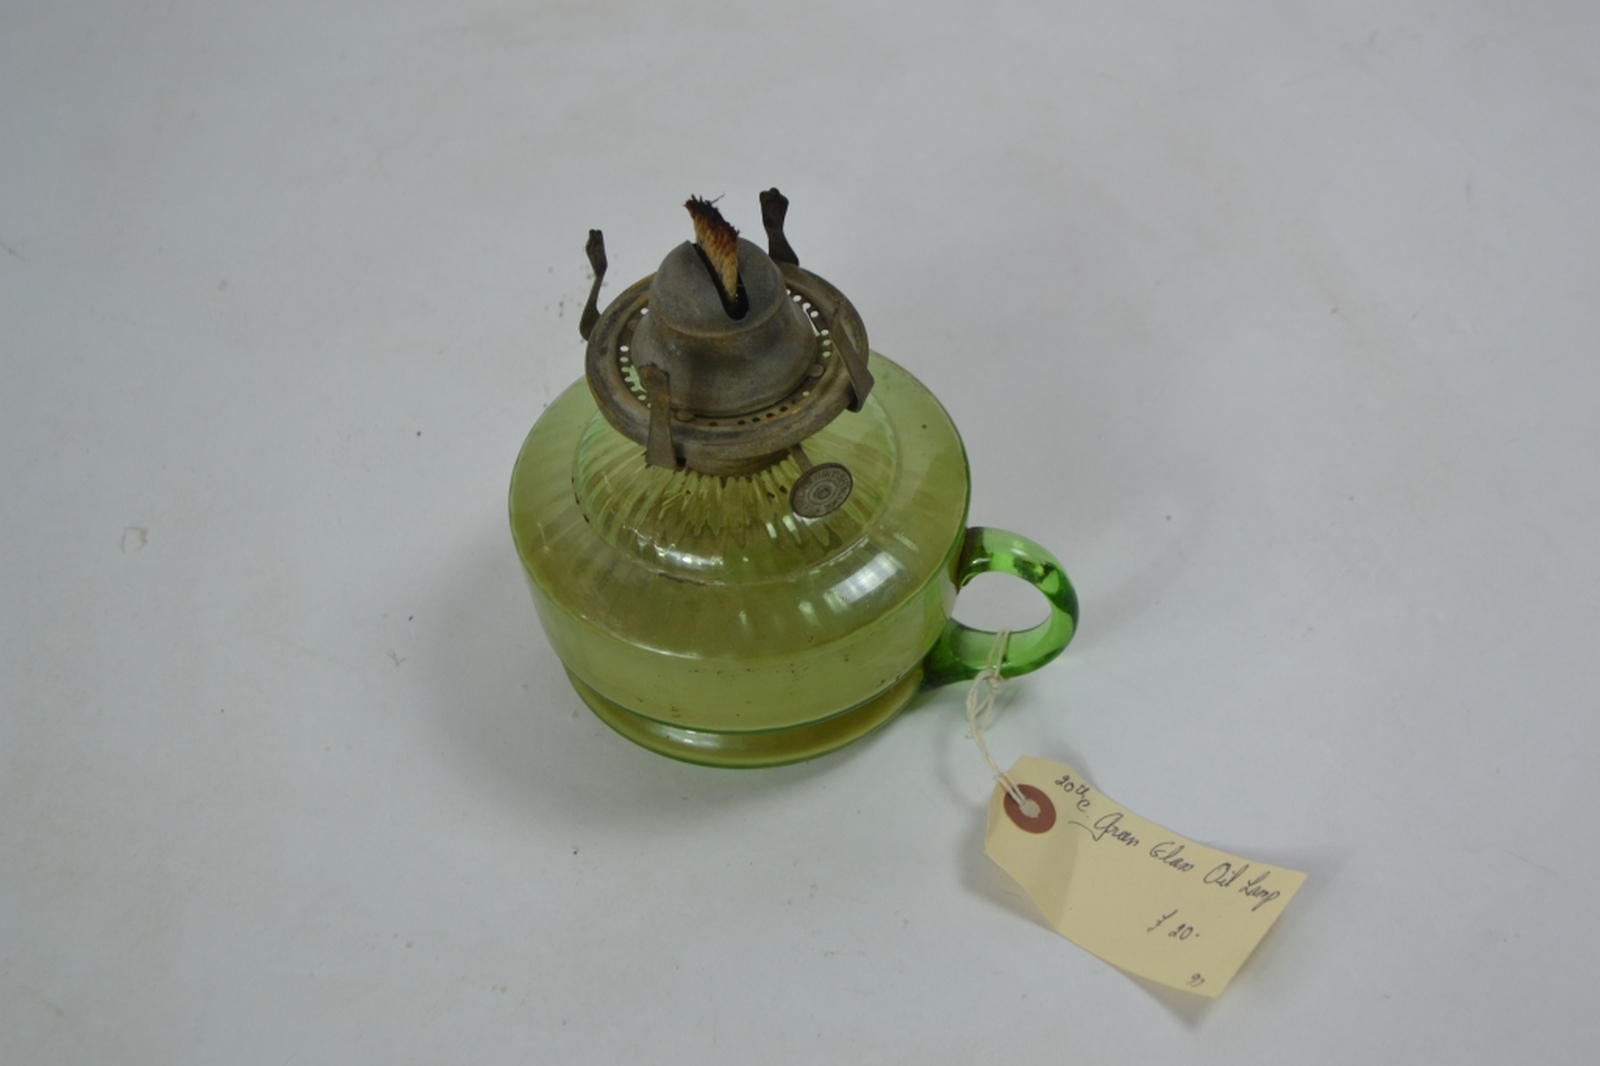 Early 20th century oil lamp with Incandescent green reservoir